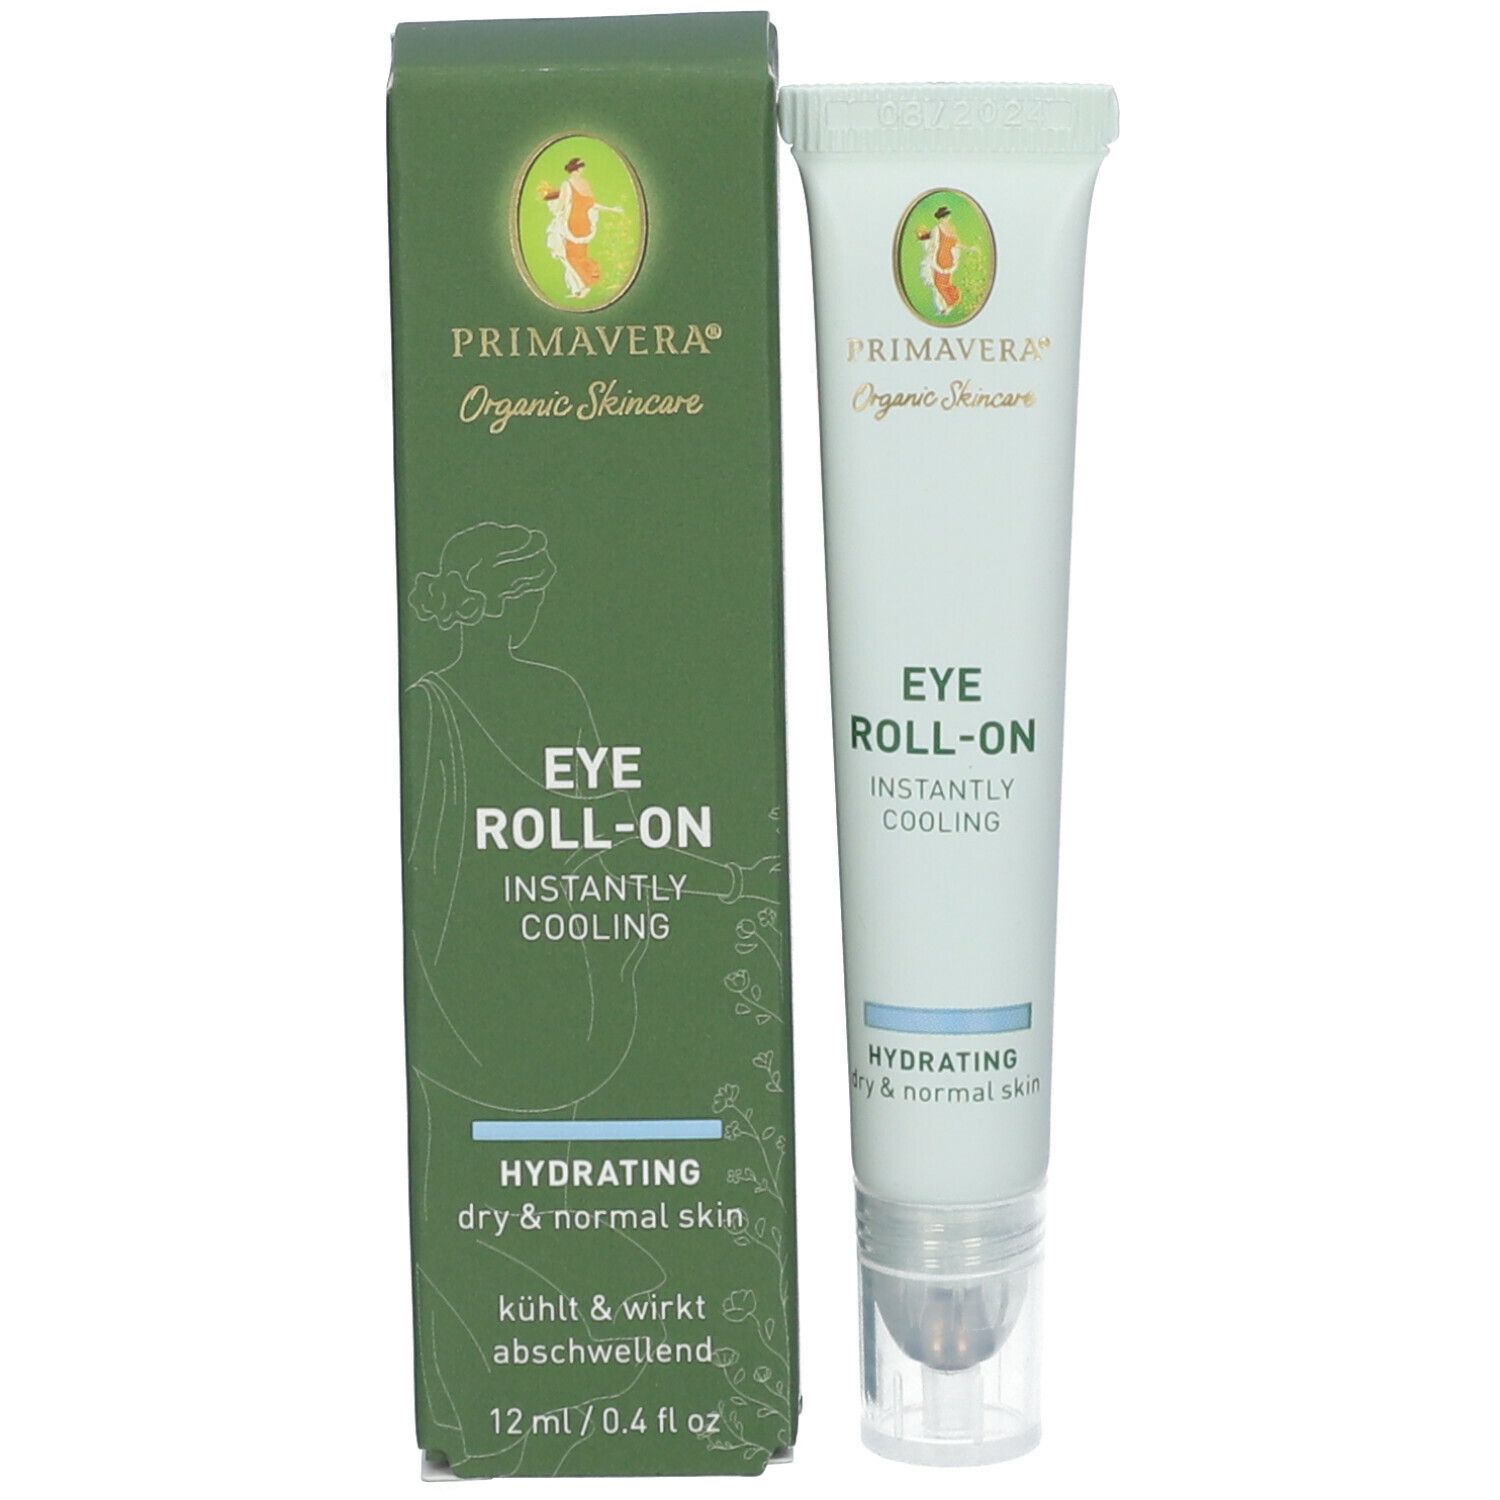 PRIMAVERA® Eye Roll-On Instantly Cooling